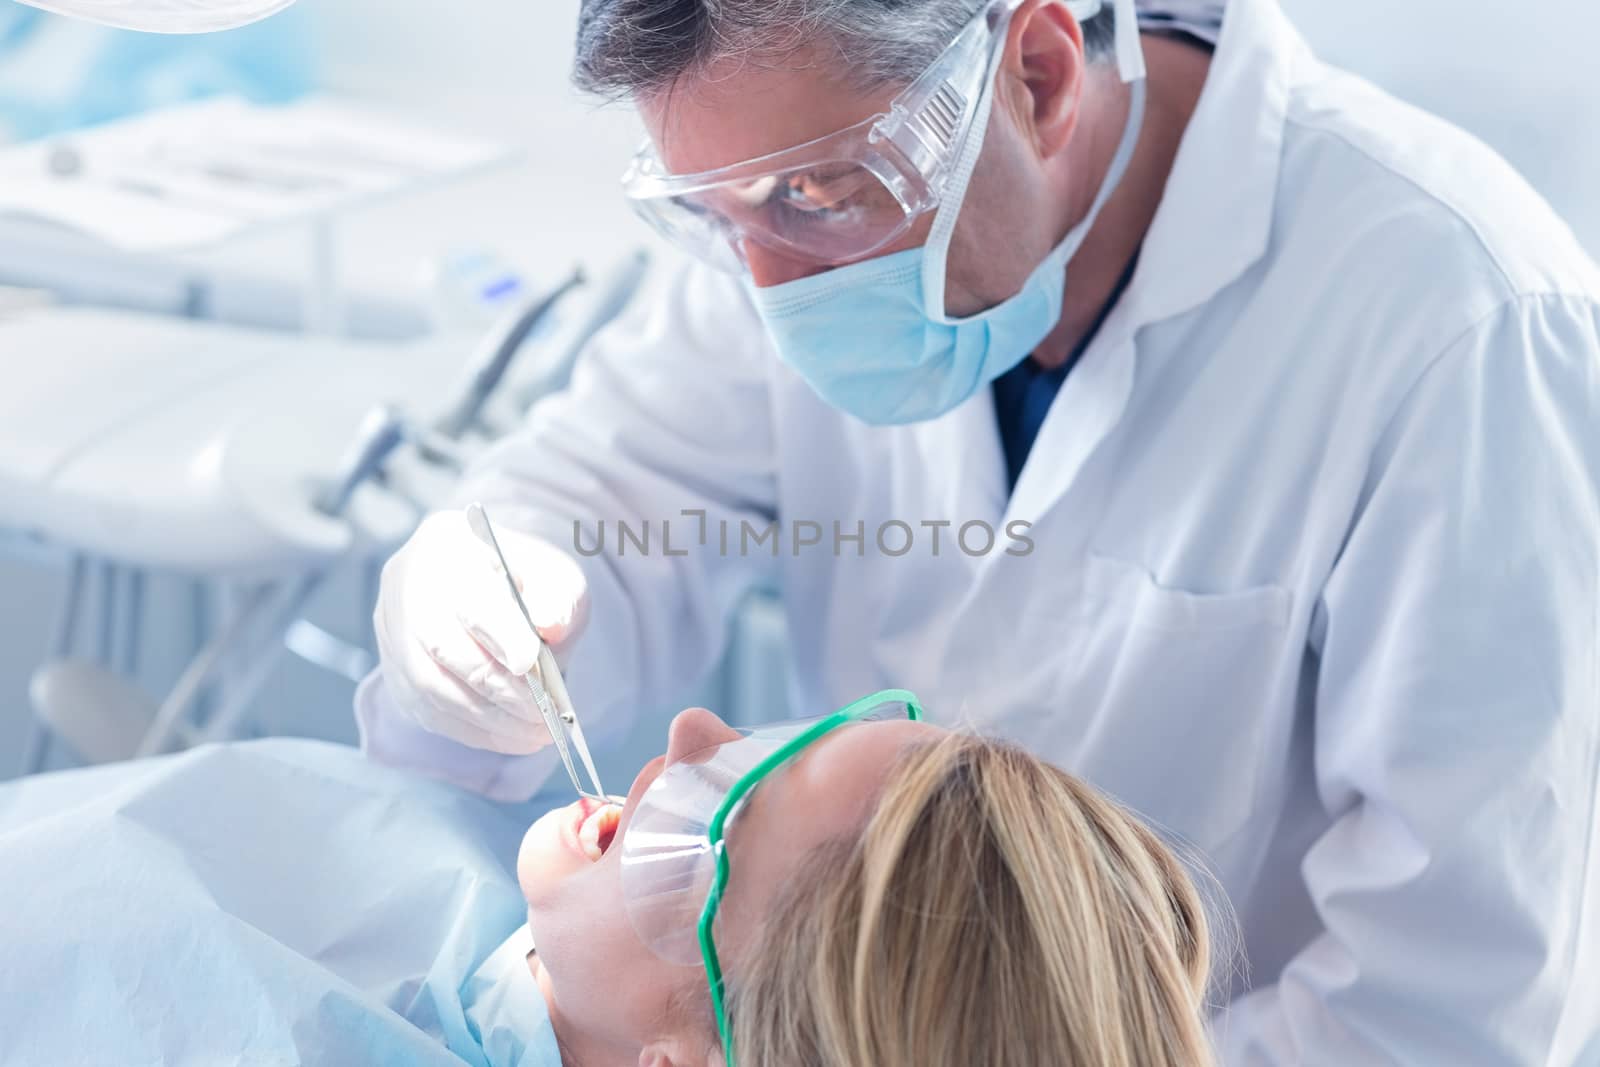 Dentist examining a patients teeth with surgical mask and gloves at the dental clinic